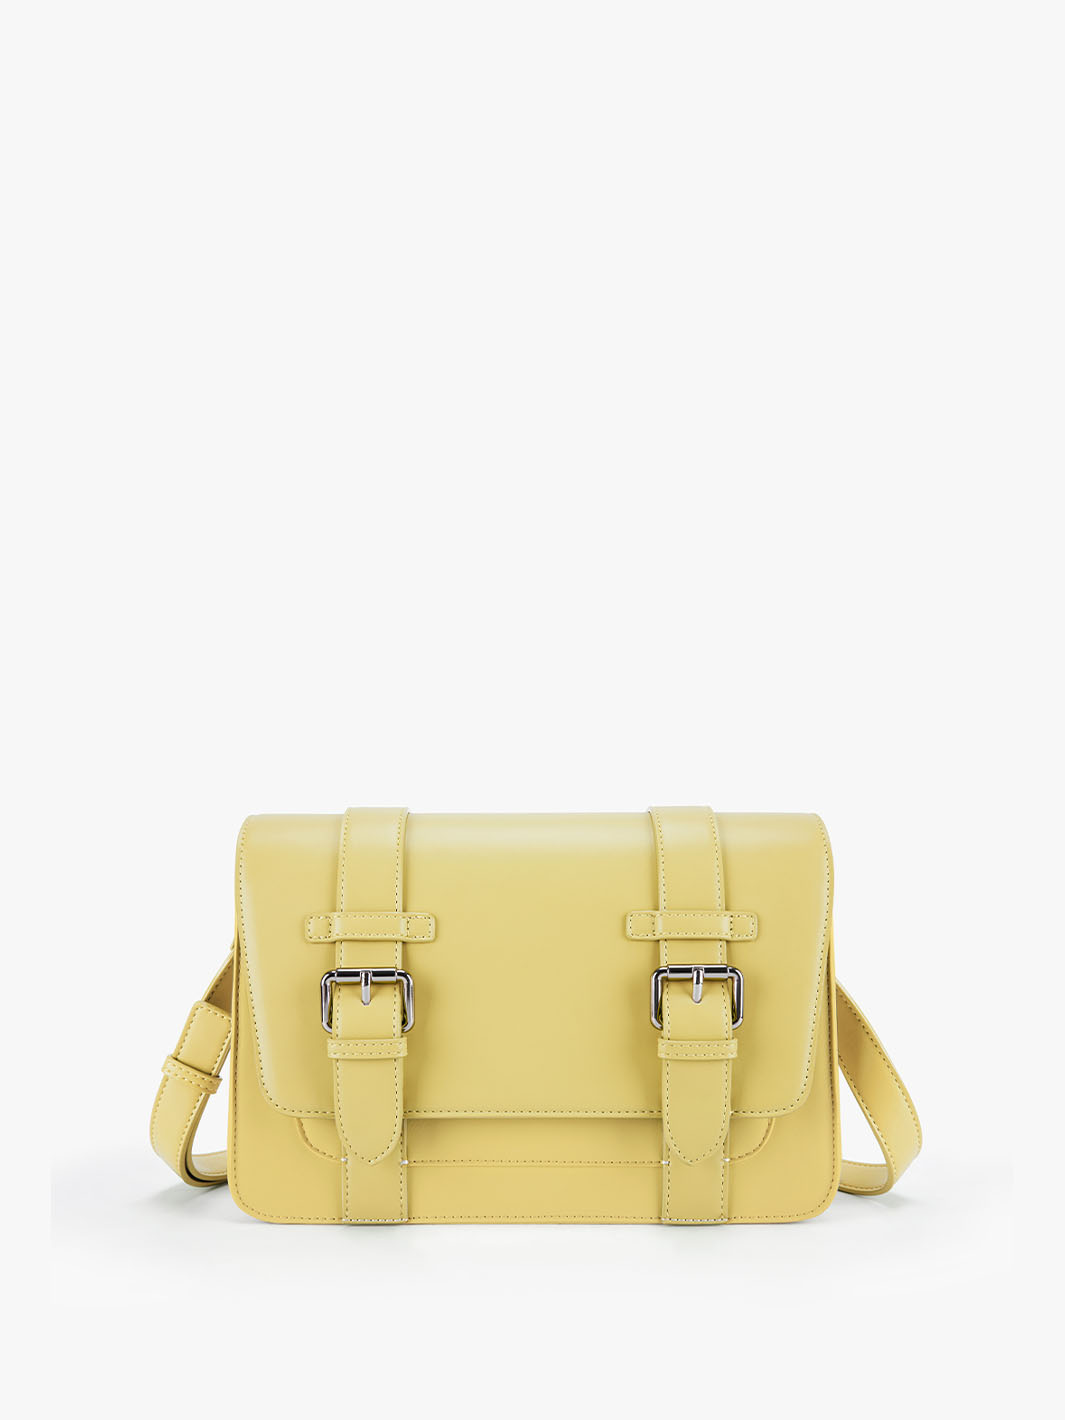 Best Crossbody Bag for Travel with Classic Yellow